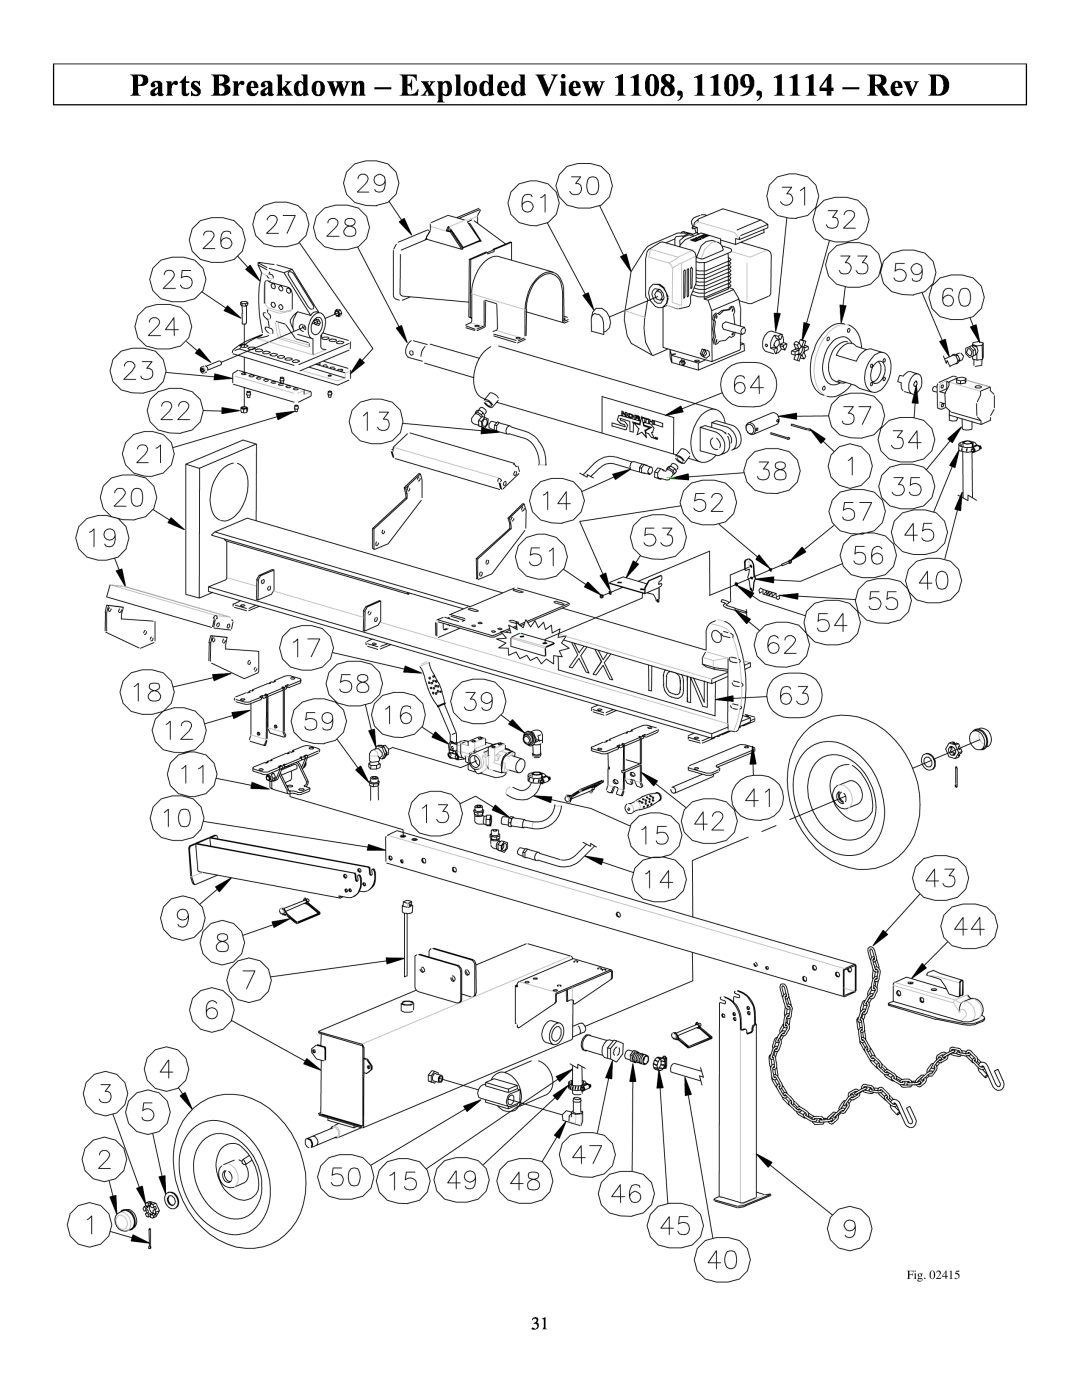 North Star M1108D owner manual Parts Breakdown - Exploded View 1108, 1109, 1114 - Rev D 